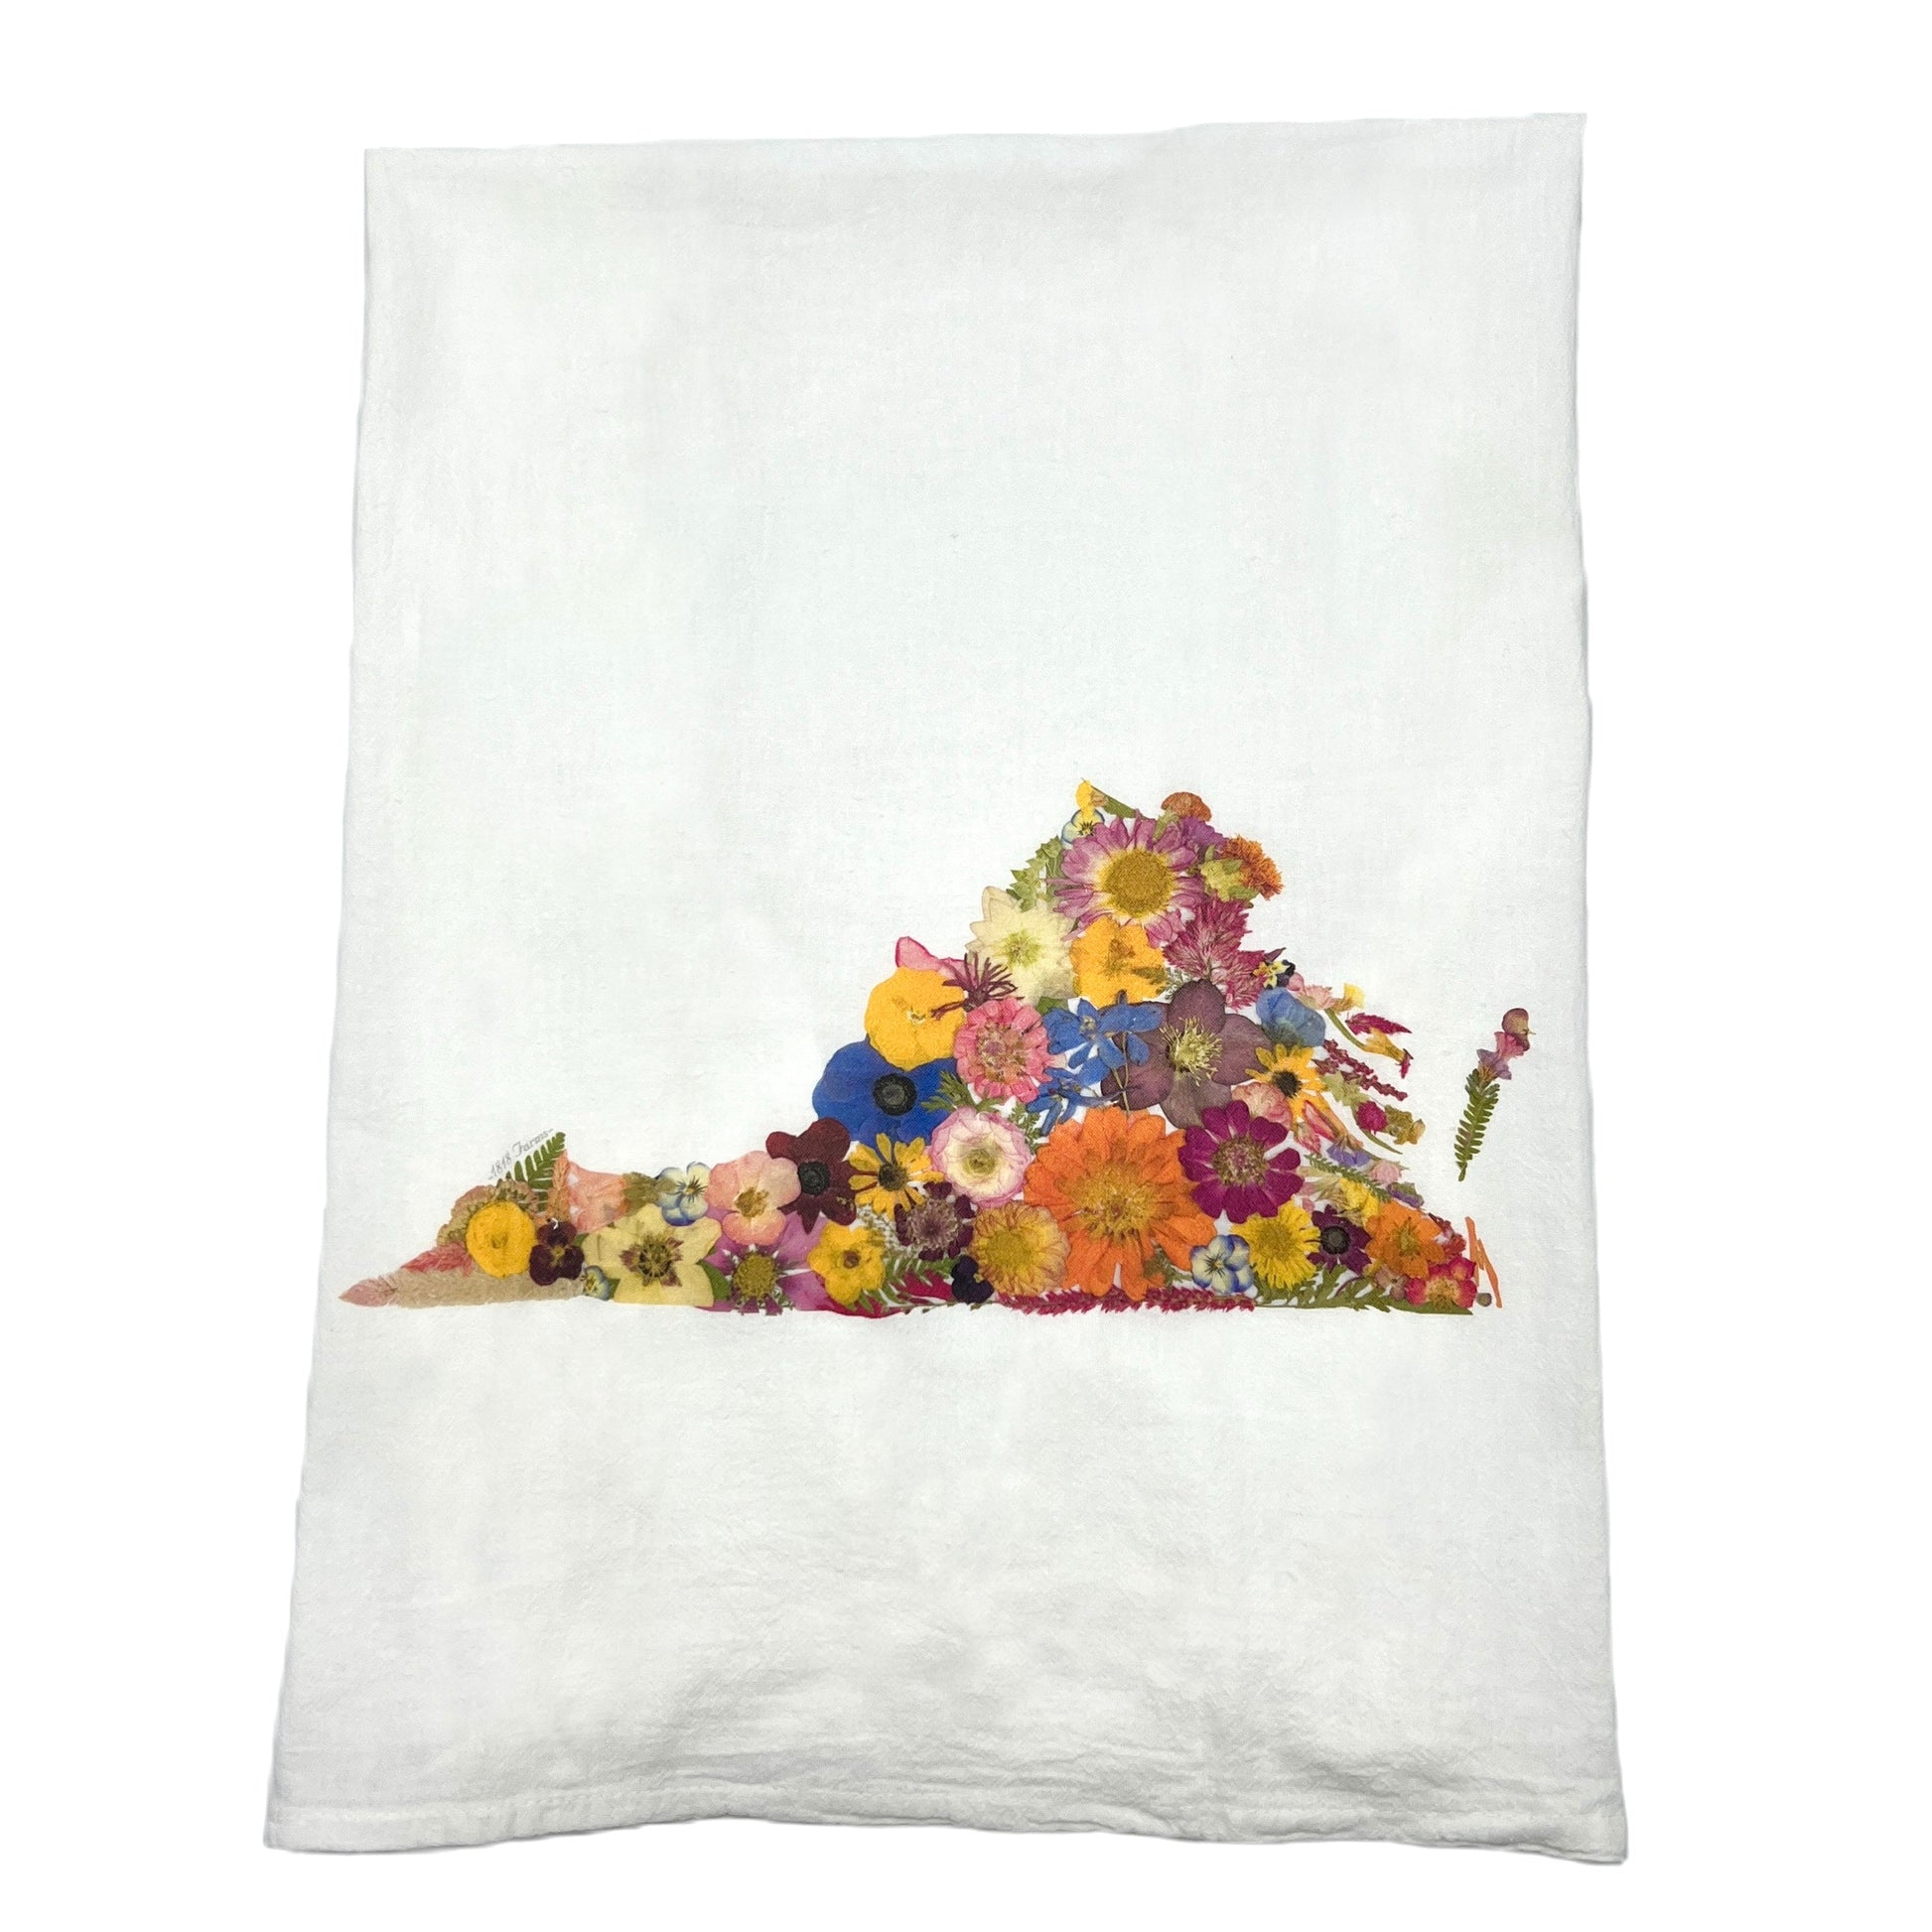 State Themed Flour Sack Towel  - "Where I Bloom" Collection Towel 1818 Farms Virginia  